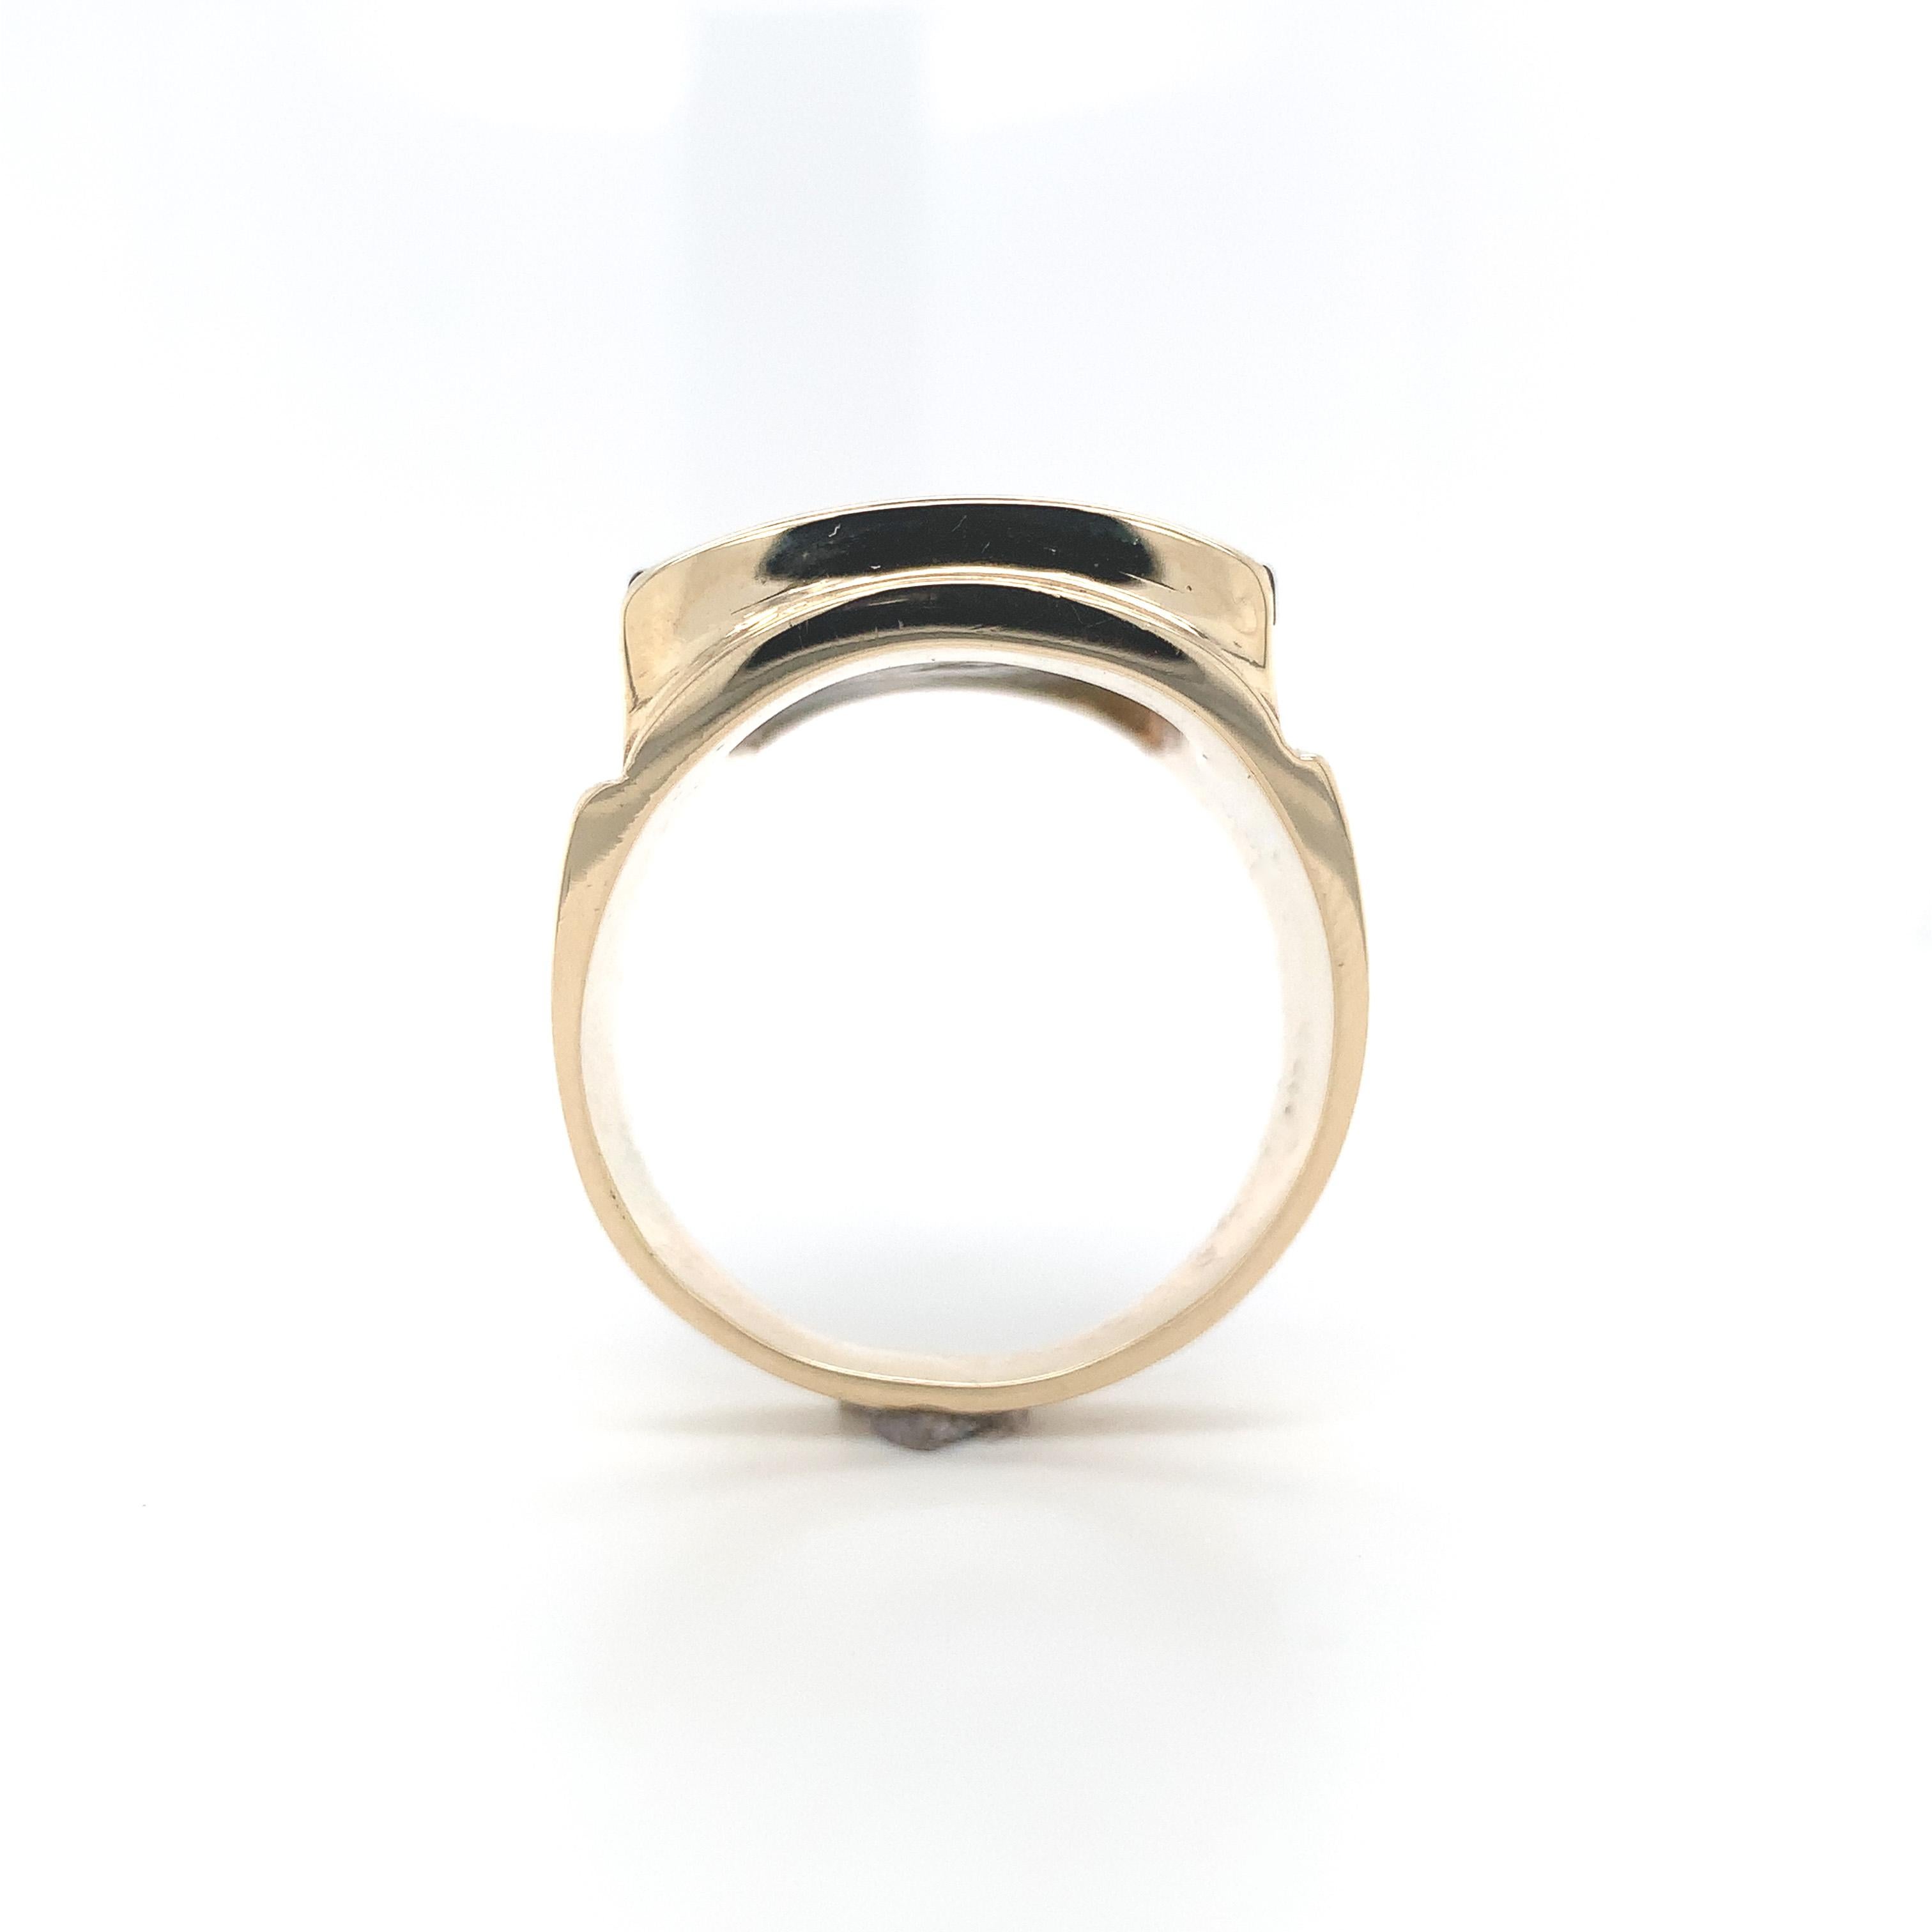 Men's 14K yellow gold black onyx and eagle ring. The flat slab rectangular black onyx measures about 20mm x 14mm. There is an applied yellow gold eagle with spread wings. There is resin behind the stone which adds to the weight of the piece. The